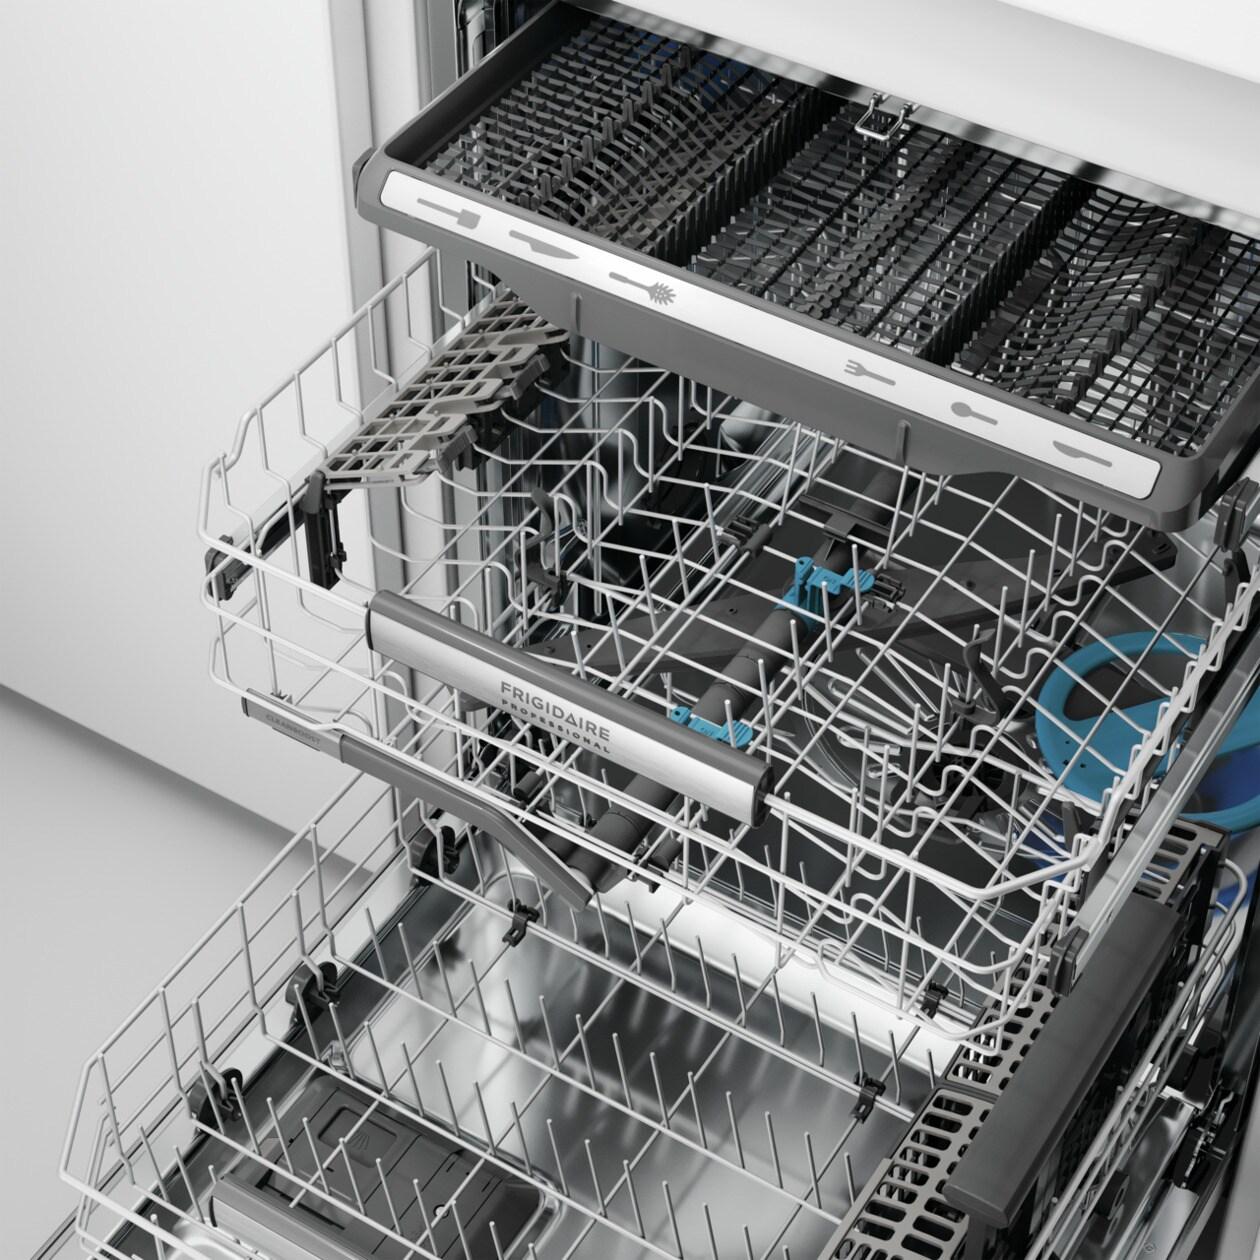 Frigidaire Professional 24" Stainless Steel Tub Built-In Dishwasher with CleanBoost™